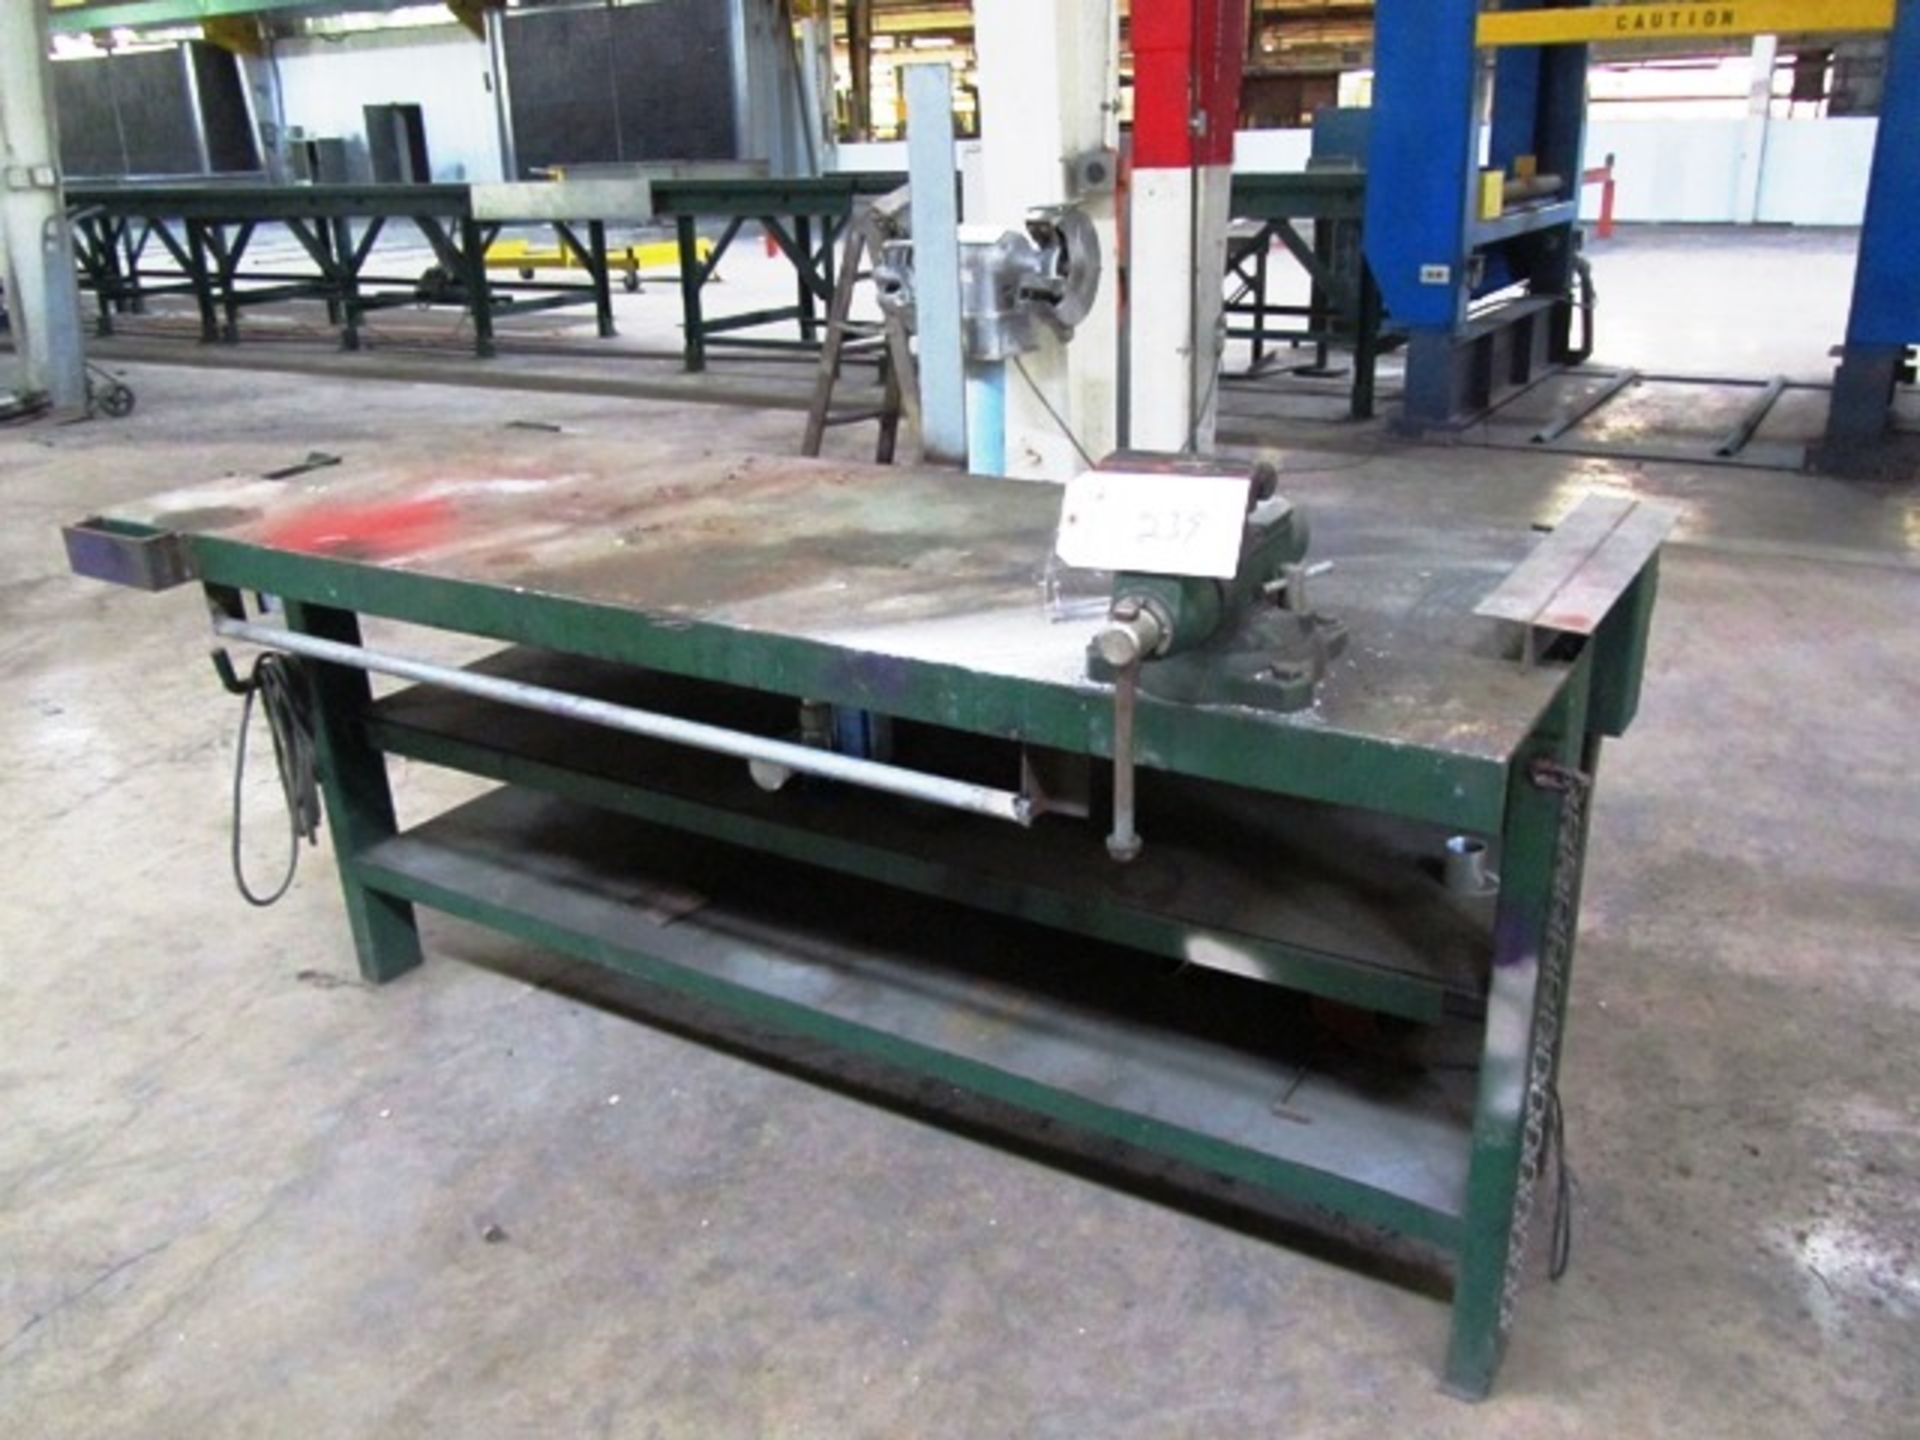 Steel Bench with Vise